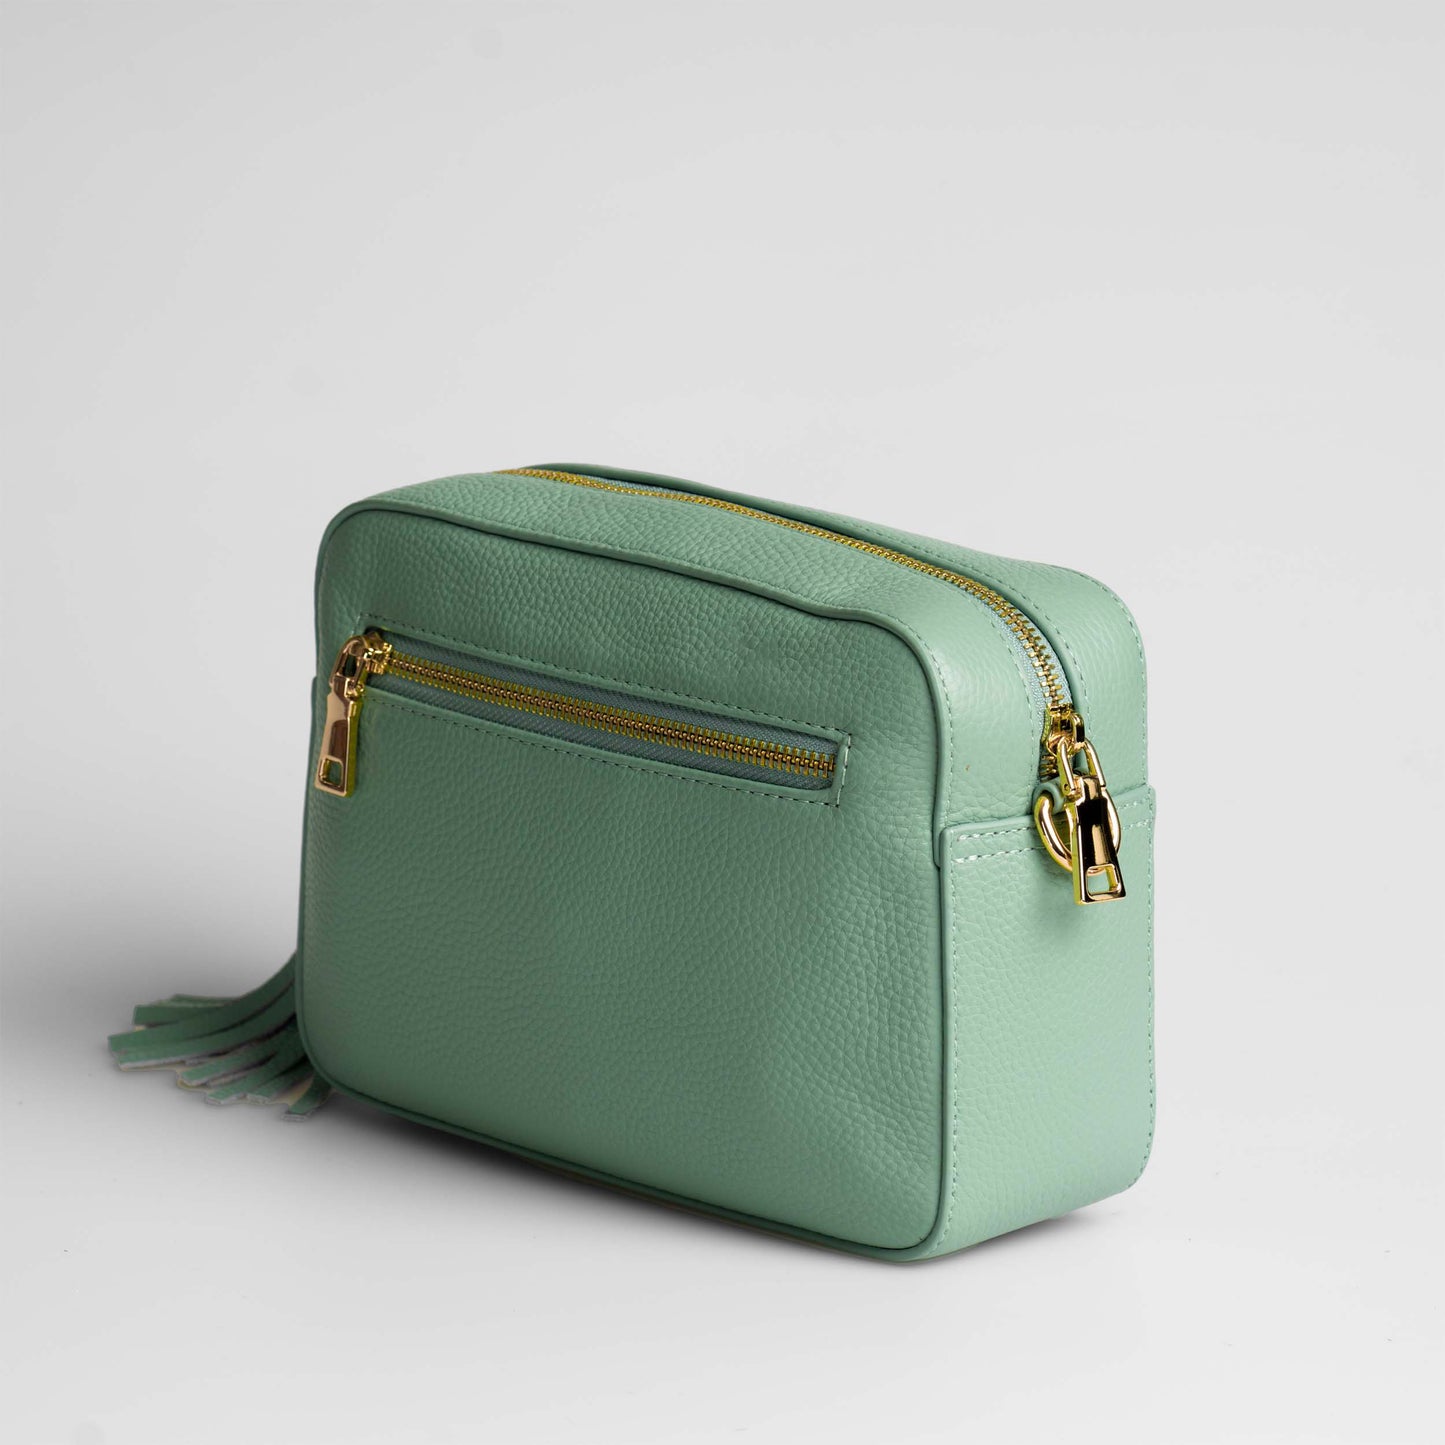 Swoon London Stratford Leather Crossbody Bag in Mint Green